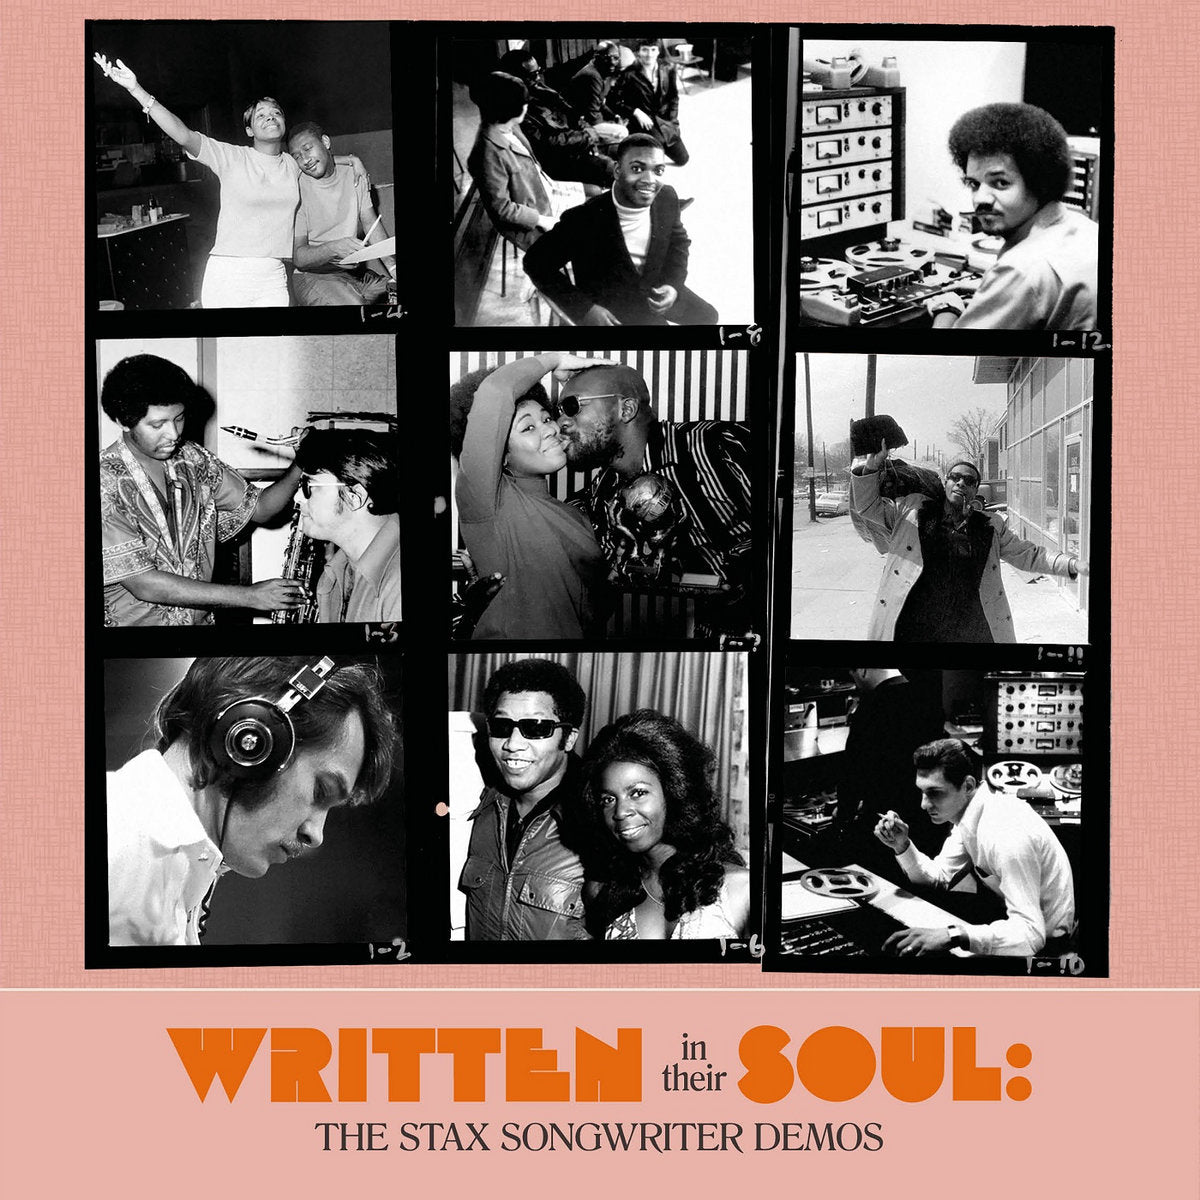 |v/a| "Written In Their Soul:  The Hits: The Stax Songwriter Demos" [Orange Vinyl]